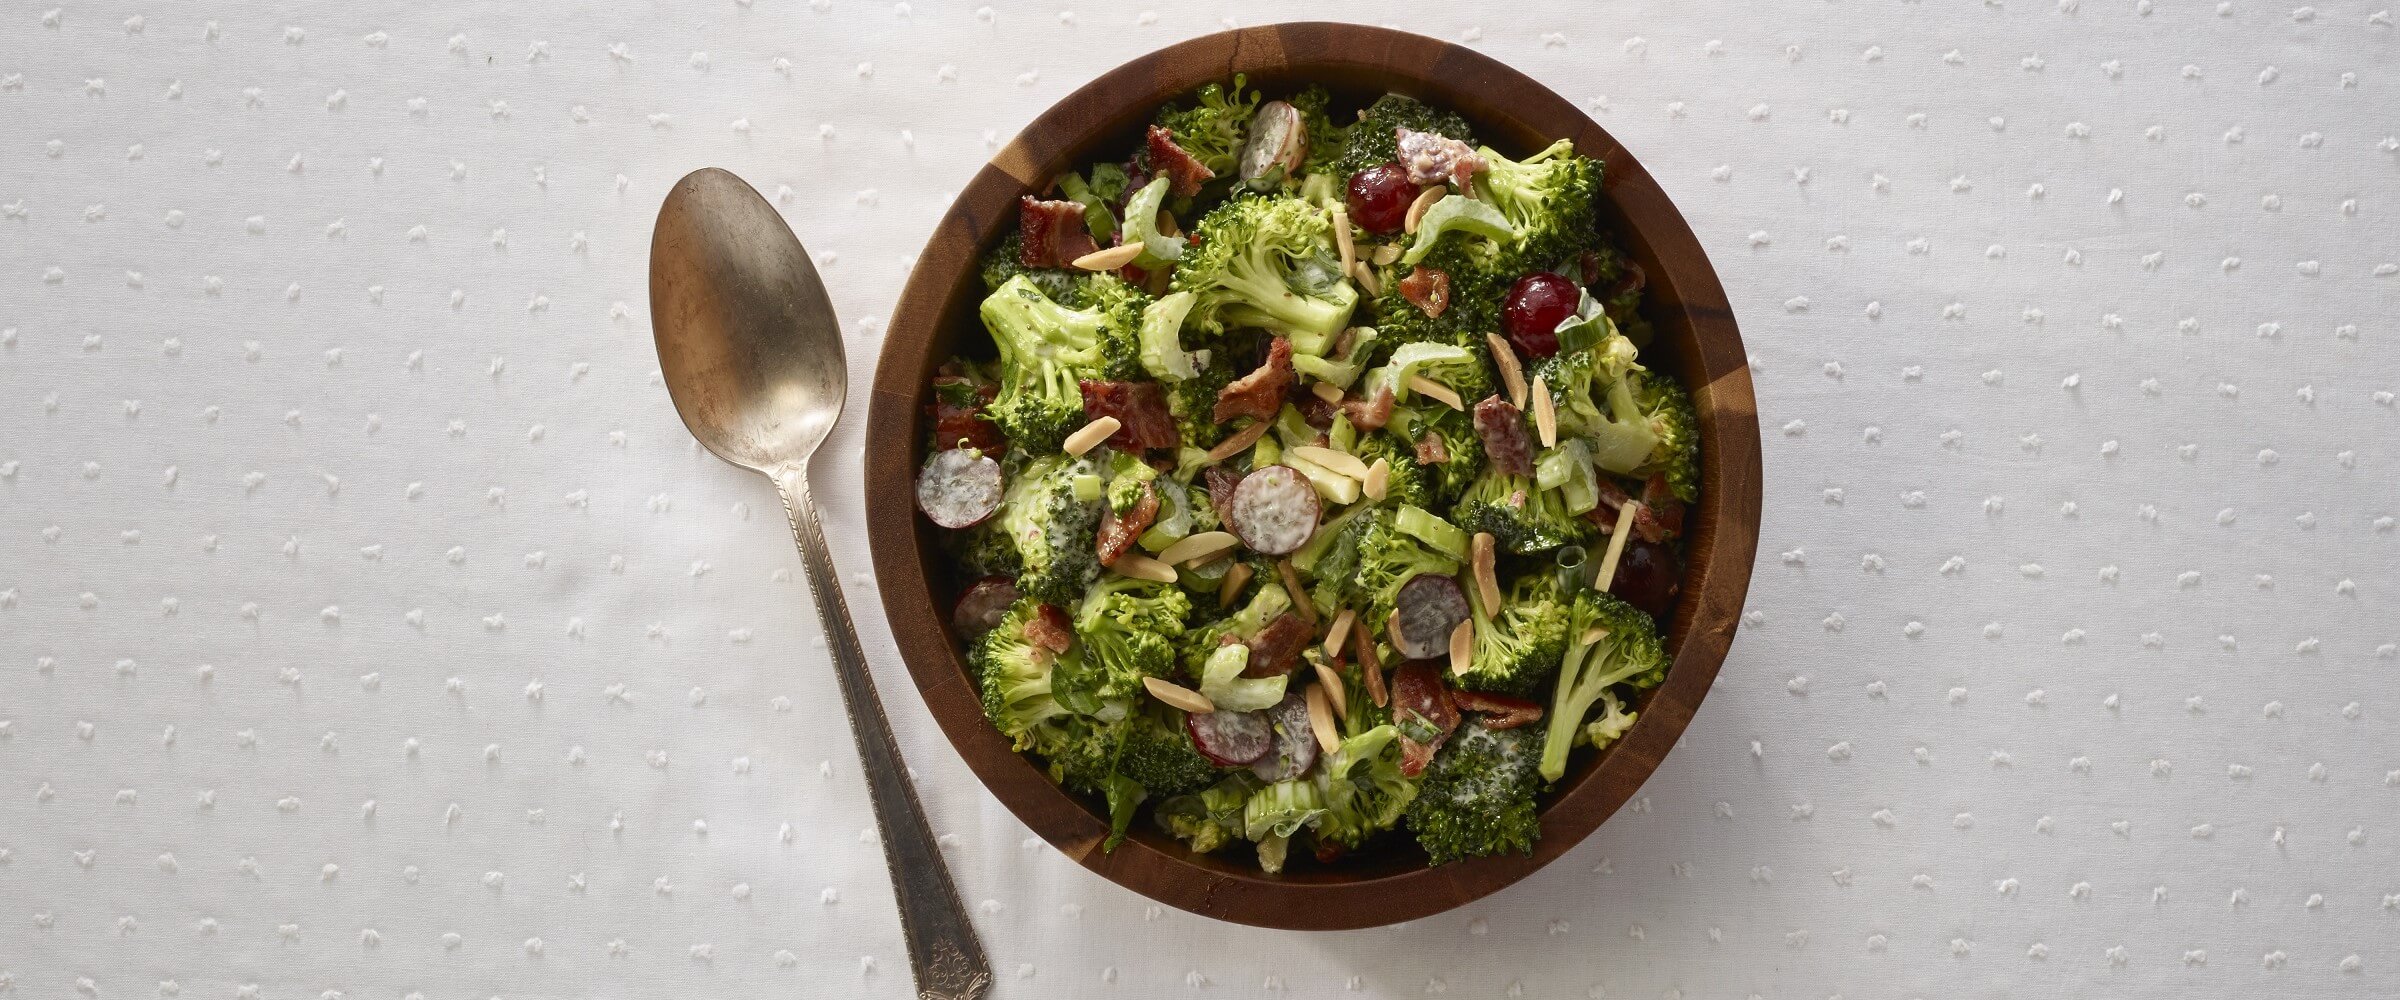 bacon broccoli salad in wood bowl with spoon